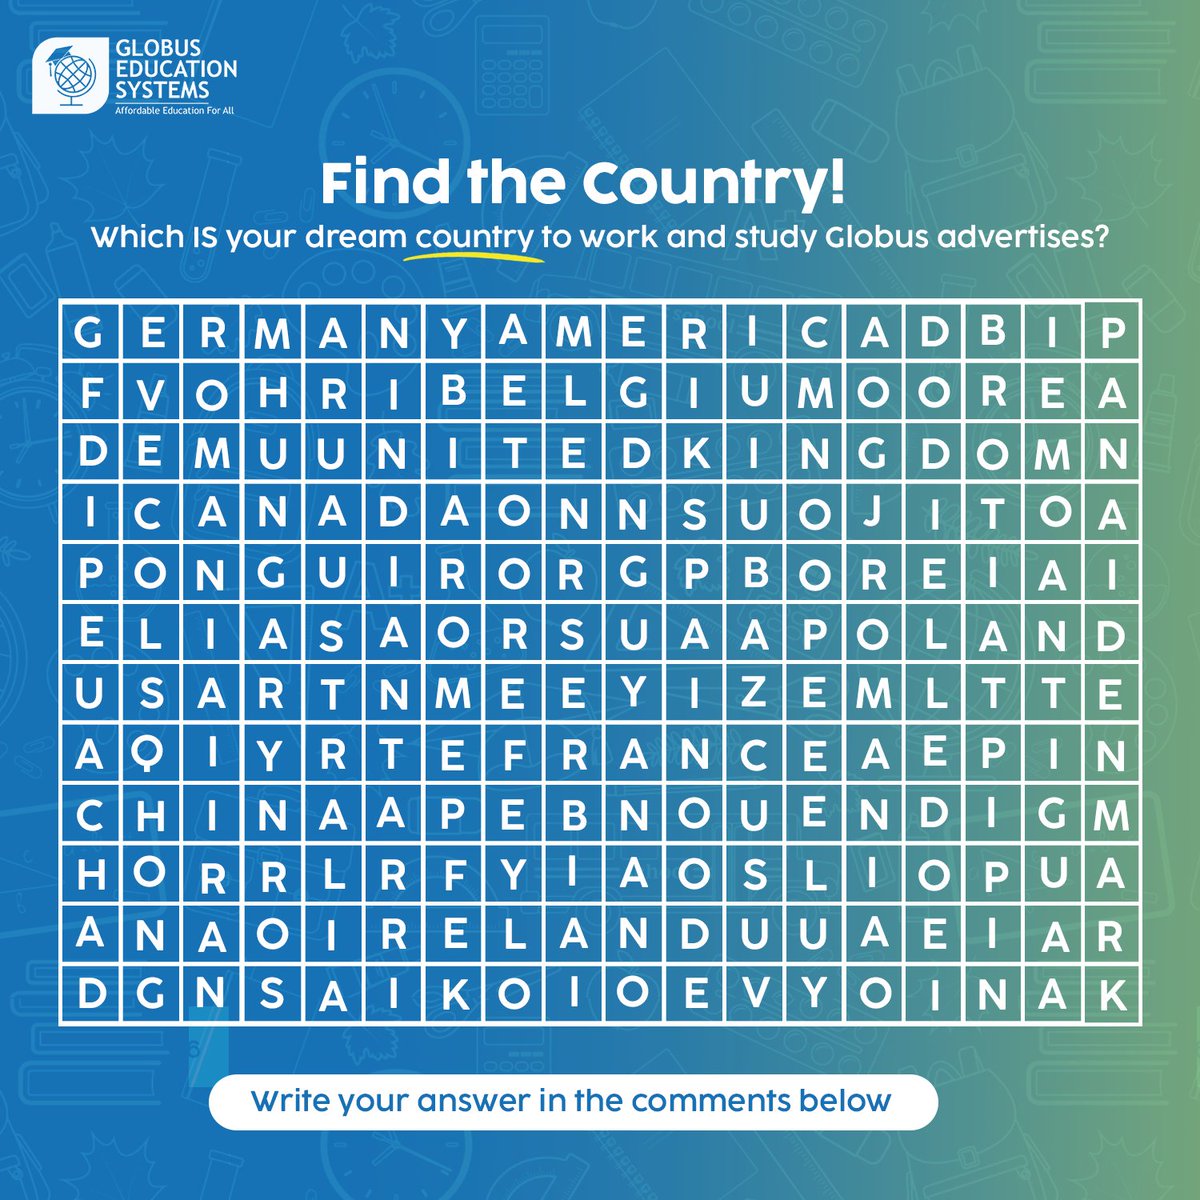 Let's test your geography knowledge with this mind-boggling country puzzle! Can you identify all the countries hidden within this puzzle? Challenge yourself and see how many you can find! 

#Countrypuzzle #Geographychallenge #Puzzlefun #studyabroad #workabroad  #GlobusEduSystems